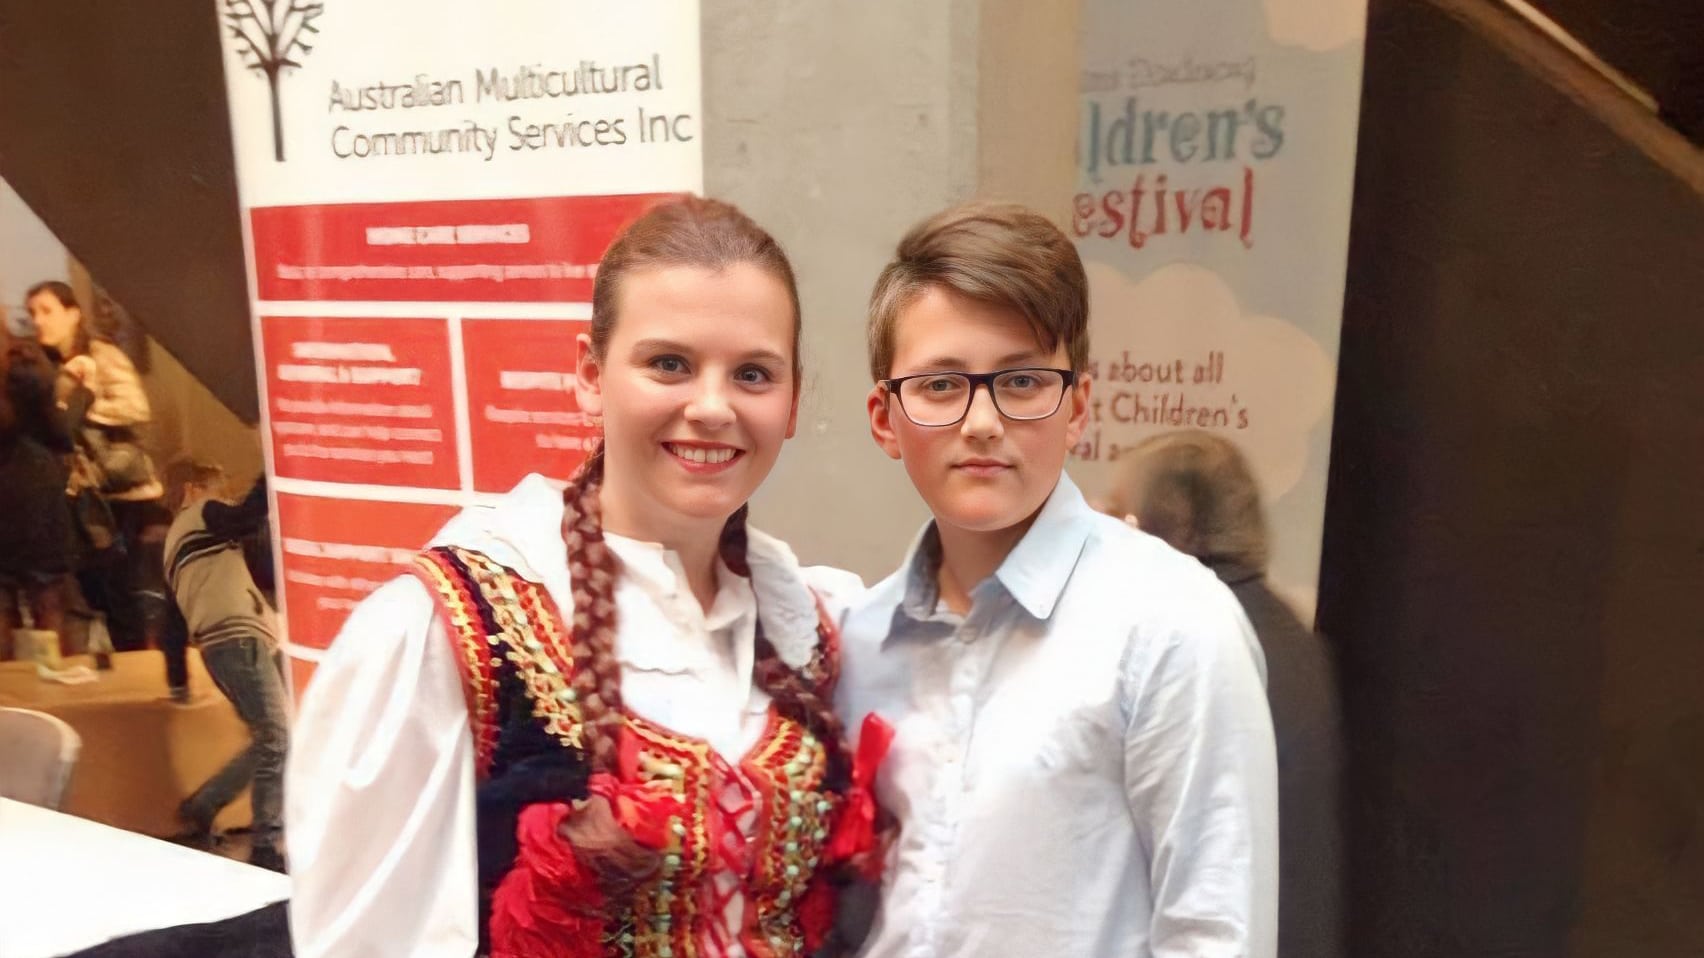 A woman in traditional Polish dress poses for a photo with a young man in white shirt and glasses